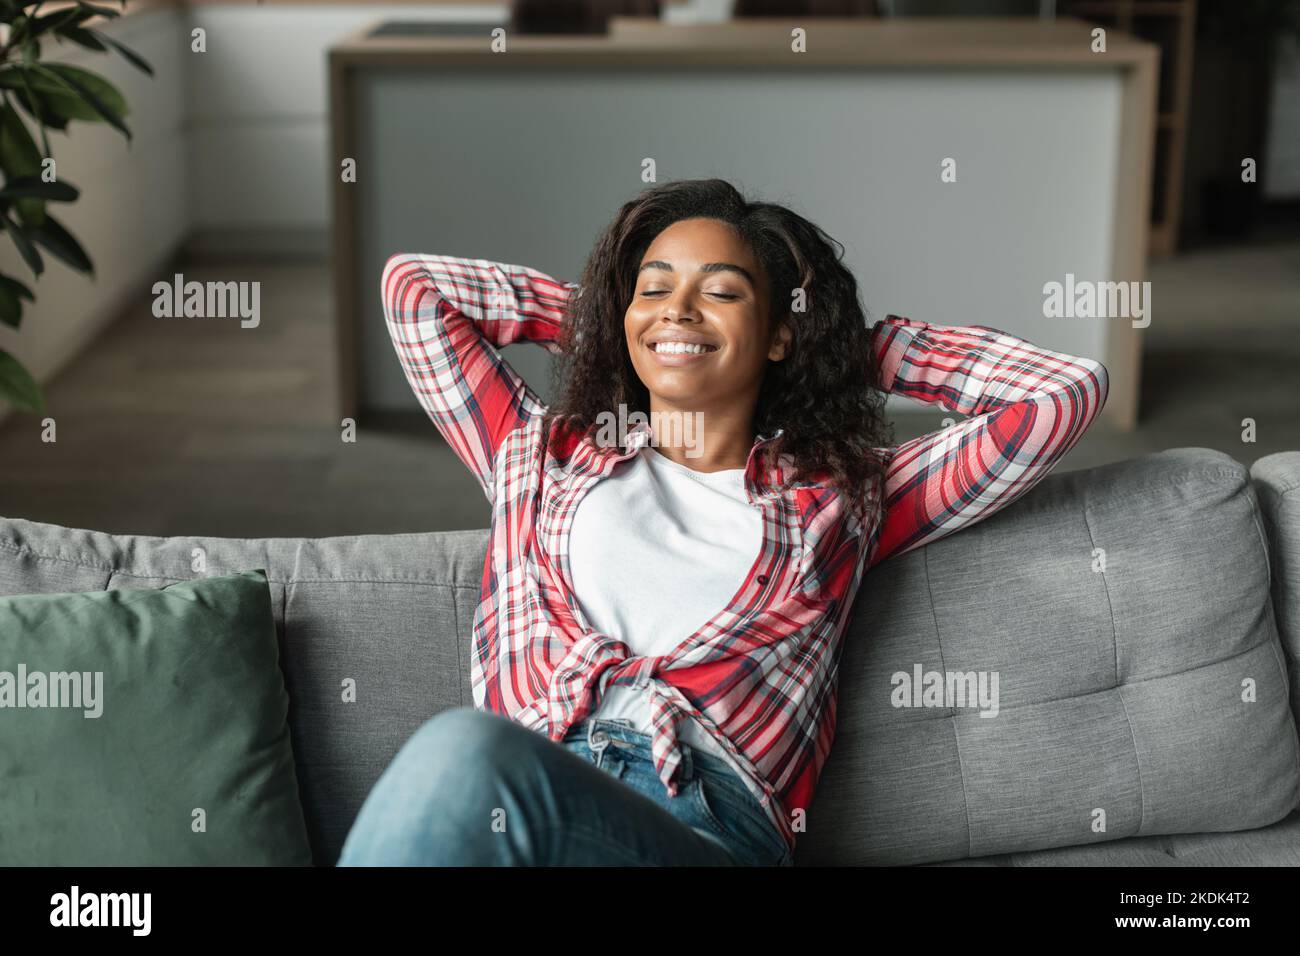 Smiling pretty black young woman with closed eyes rest alone on sofa in minimalist living room interior Stock Photo